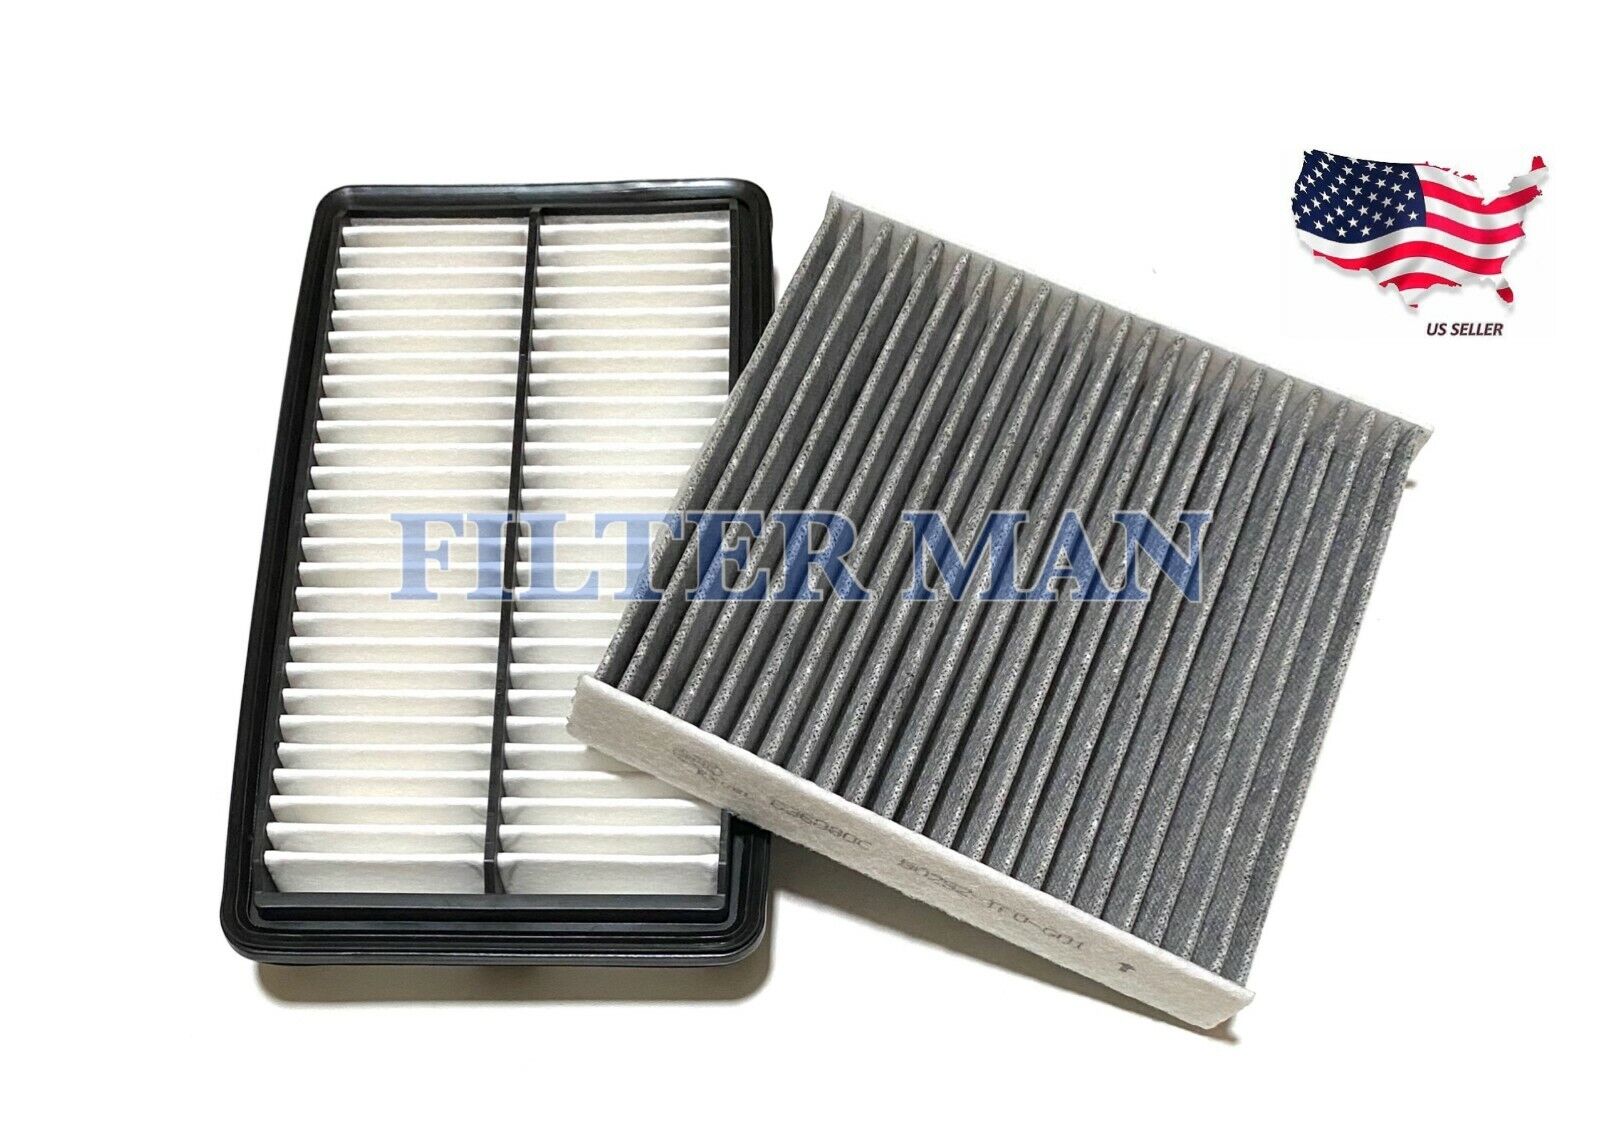 ENGINE & CARBONIZED CABIN Air Filter for 21-22 ACURA TLX 18-22 HONDA ODYSSEY